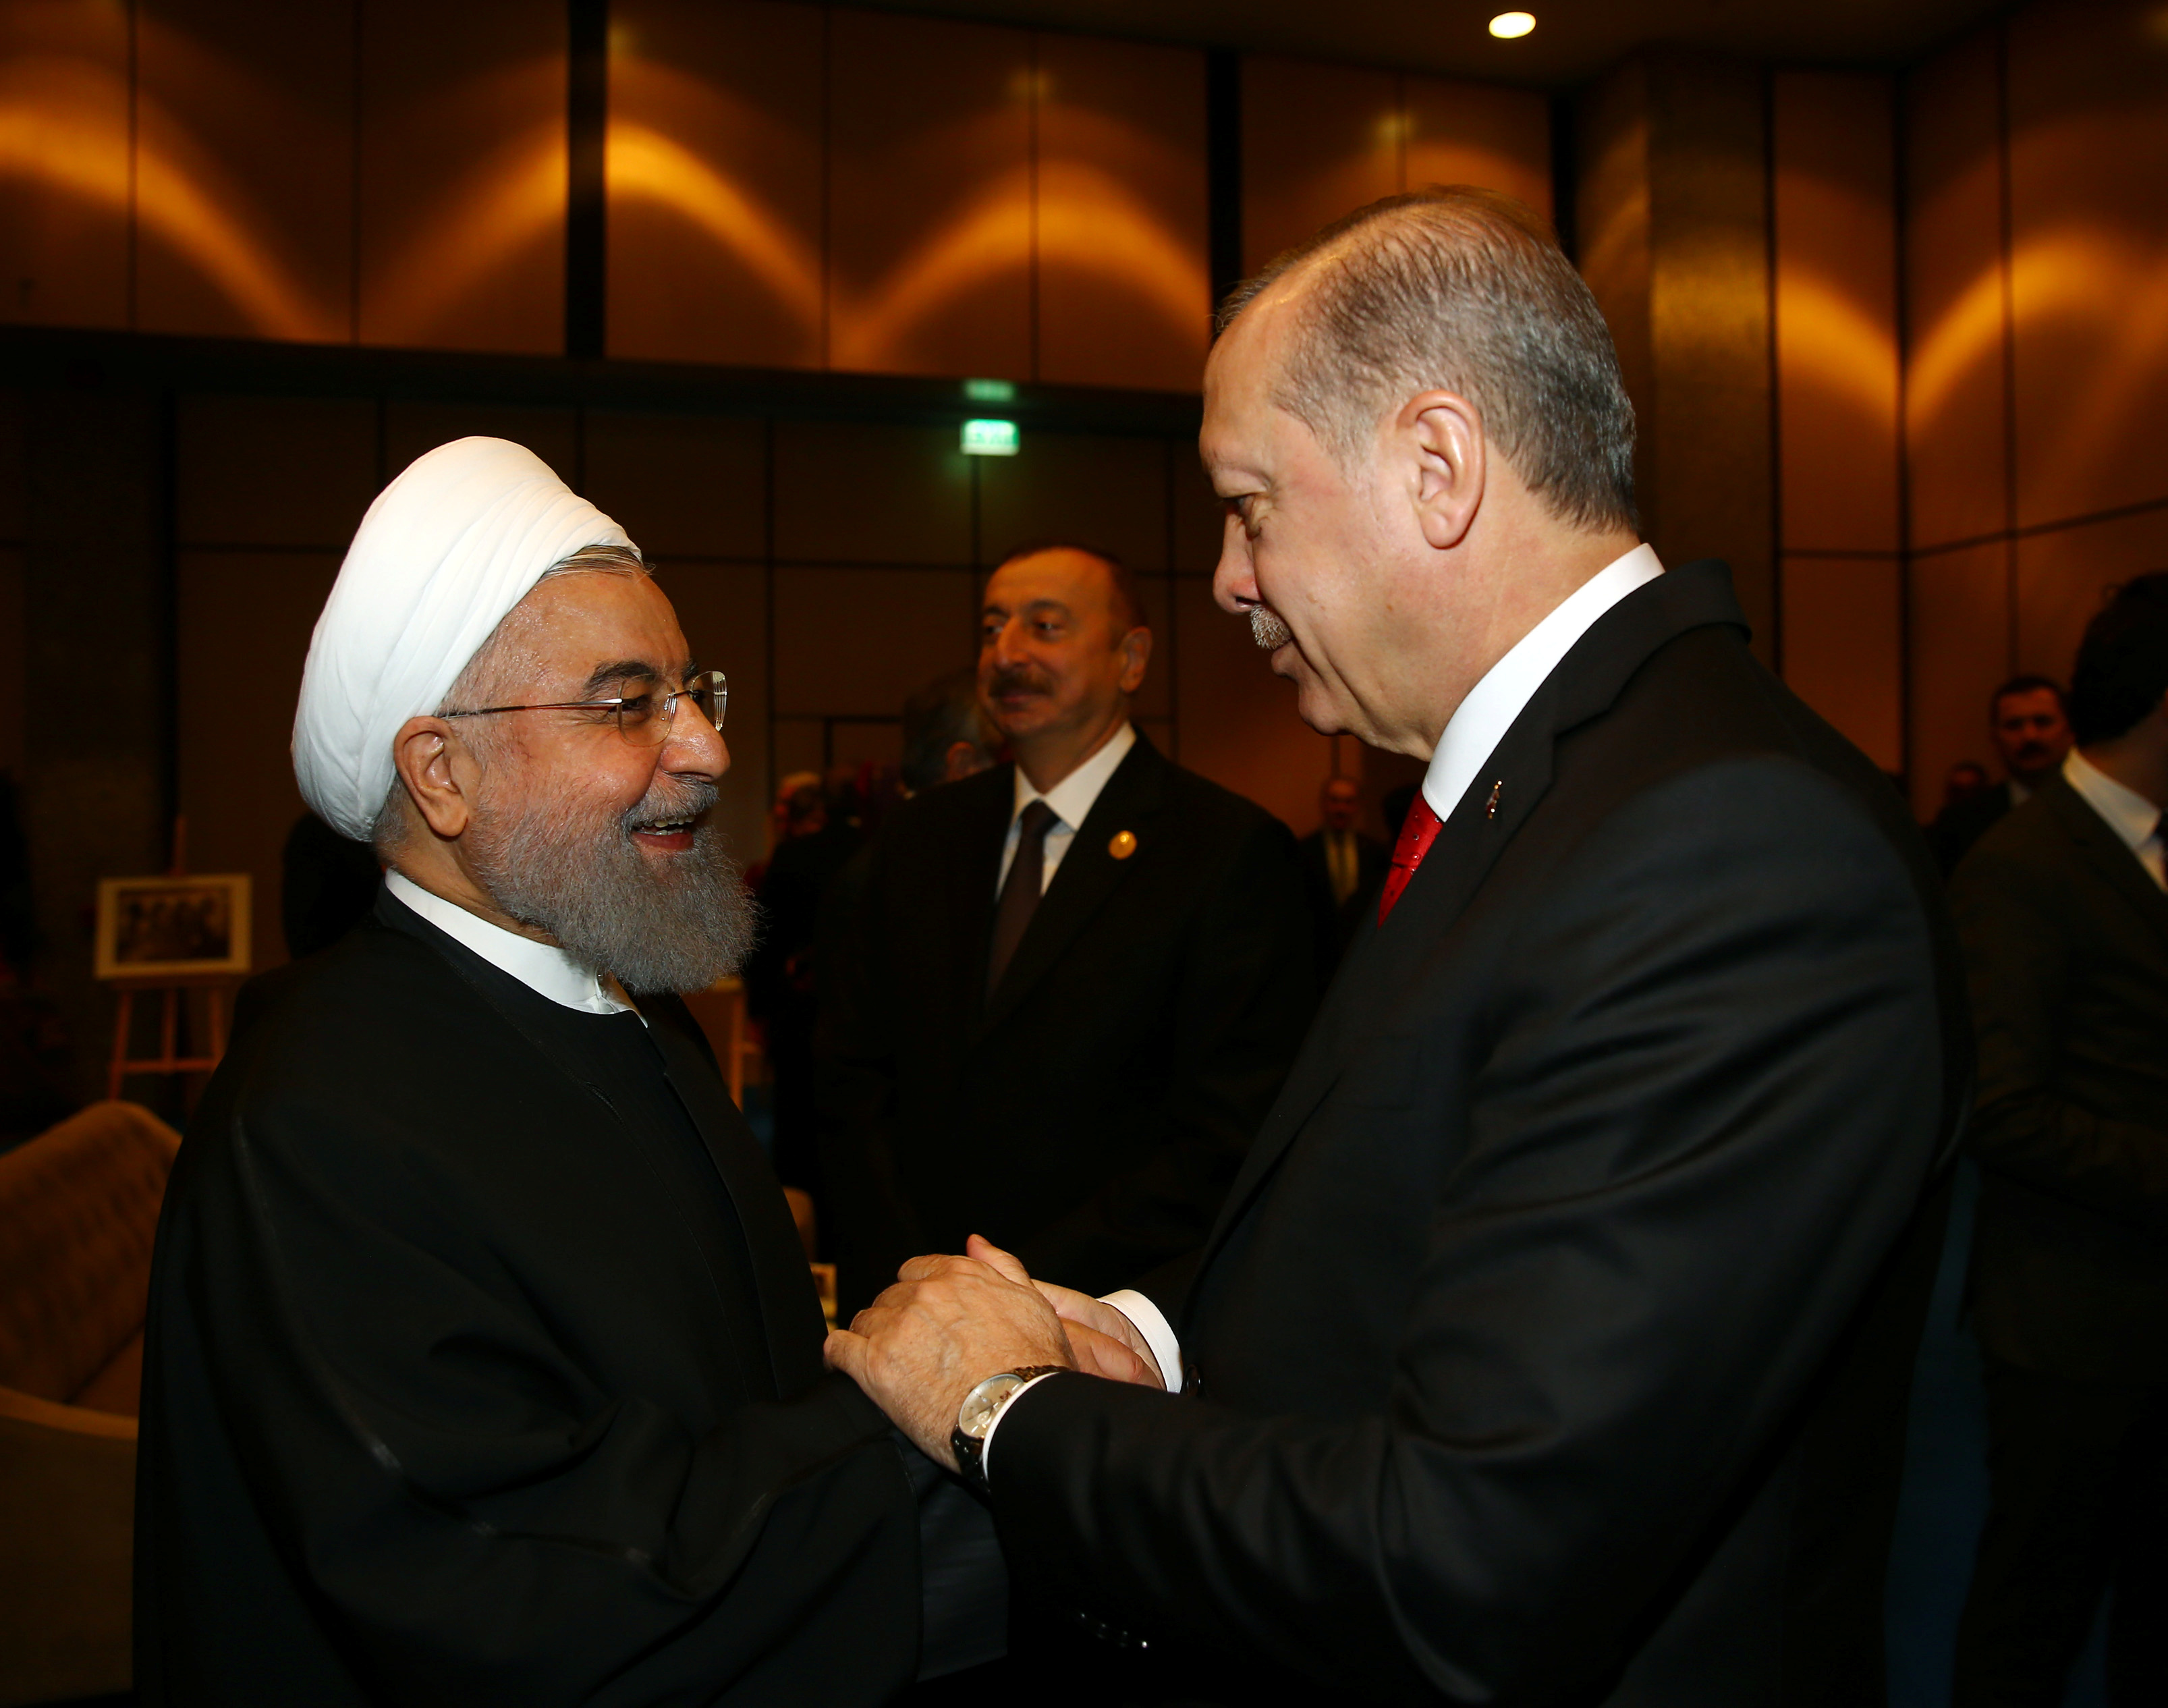 Turkish President Tayyip Erdogan meets with Iran's President Hassan Rouhani during an extraordinary meeting of the Organisation of Islamic Cooperation (OIC) in Istanbul, Turkey, December 13, 2017. REUTERS/Kayhan Ozer/Pool 